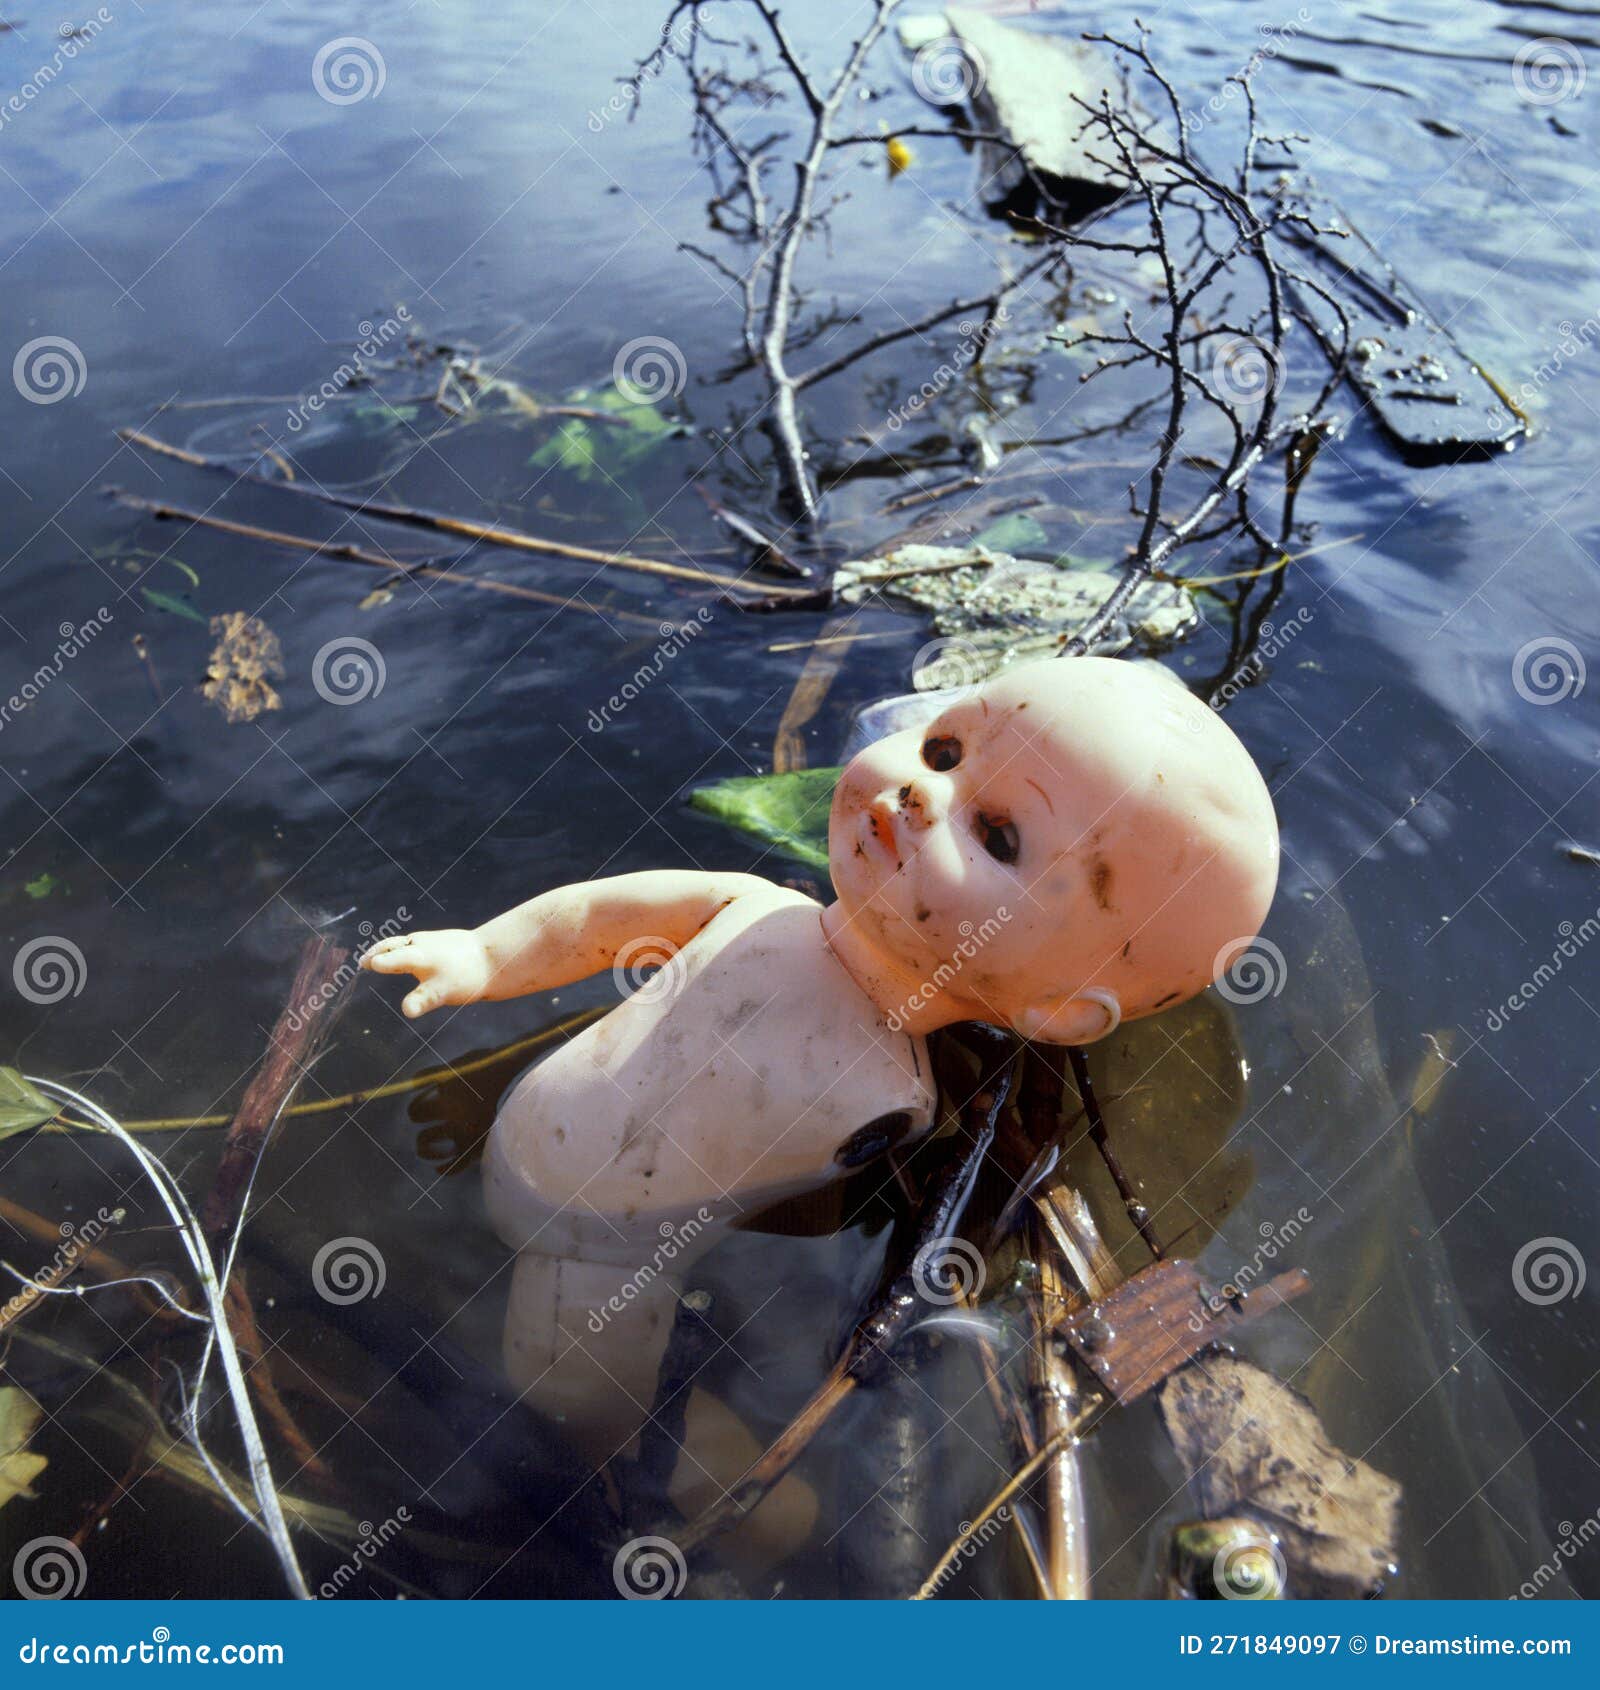 pollution in public water by a discard,plastic toy doll